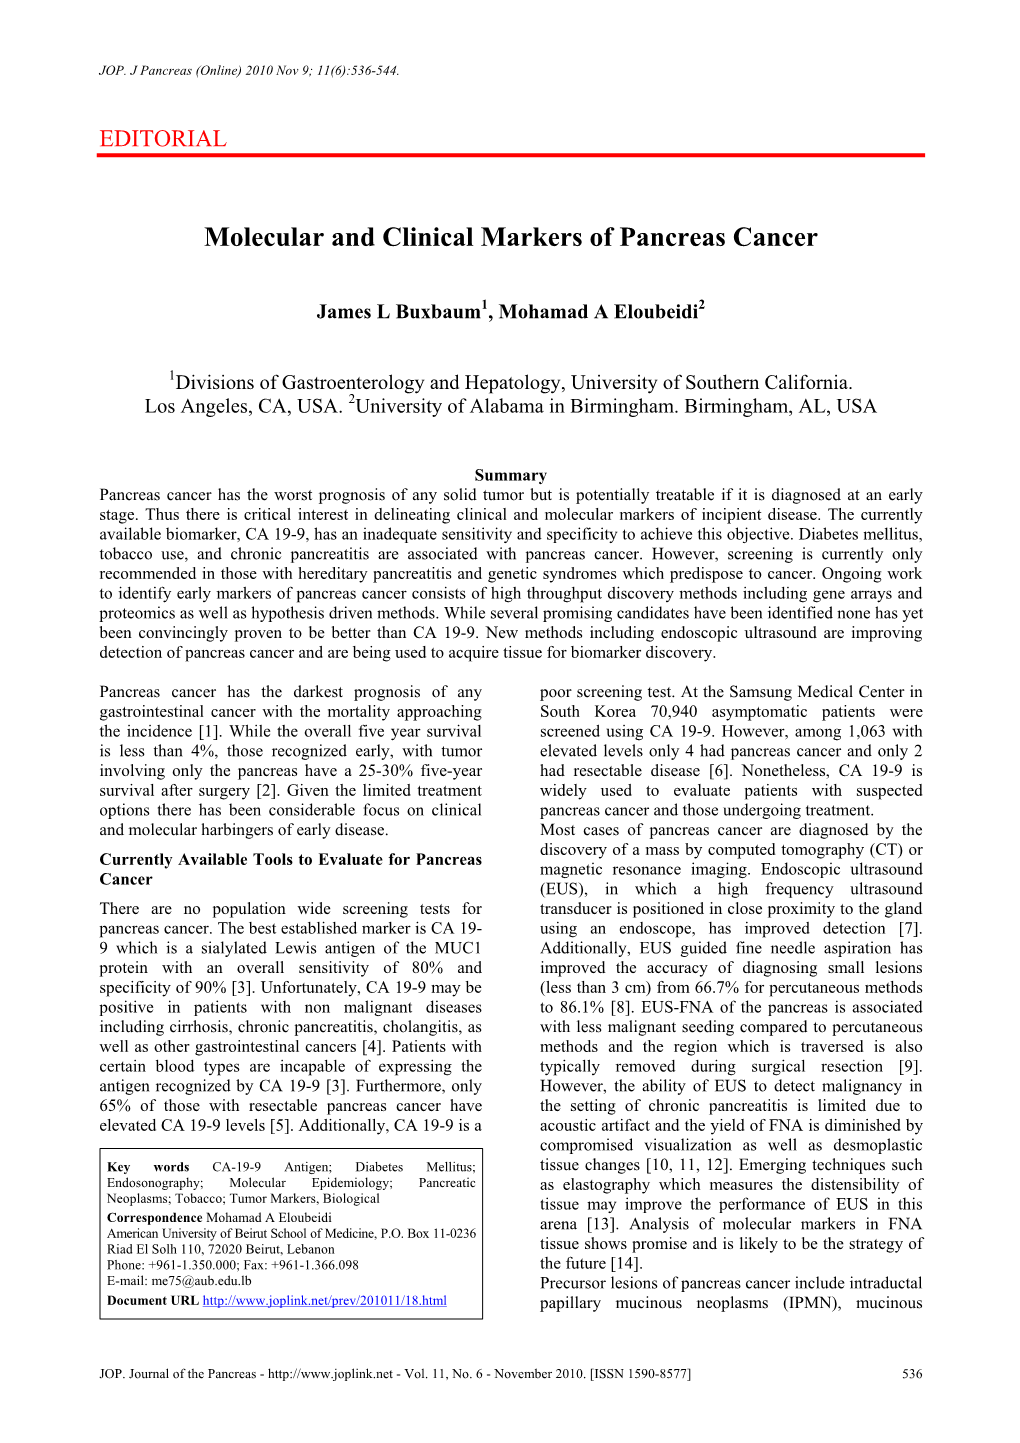 Molecular and Clinical Markers of Pancreas Cancer